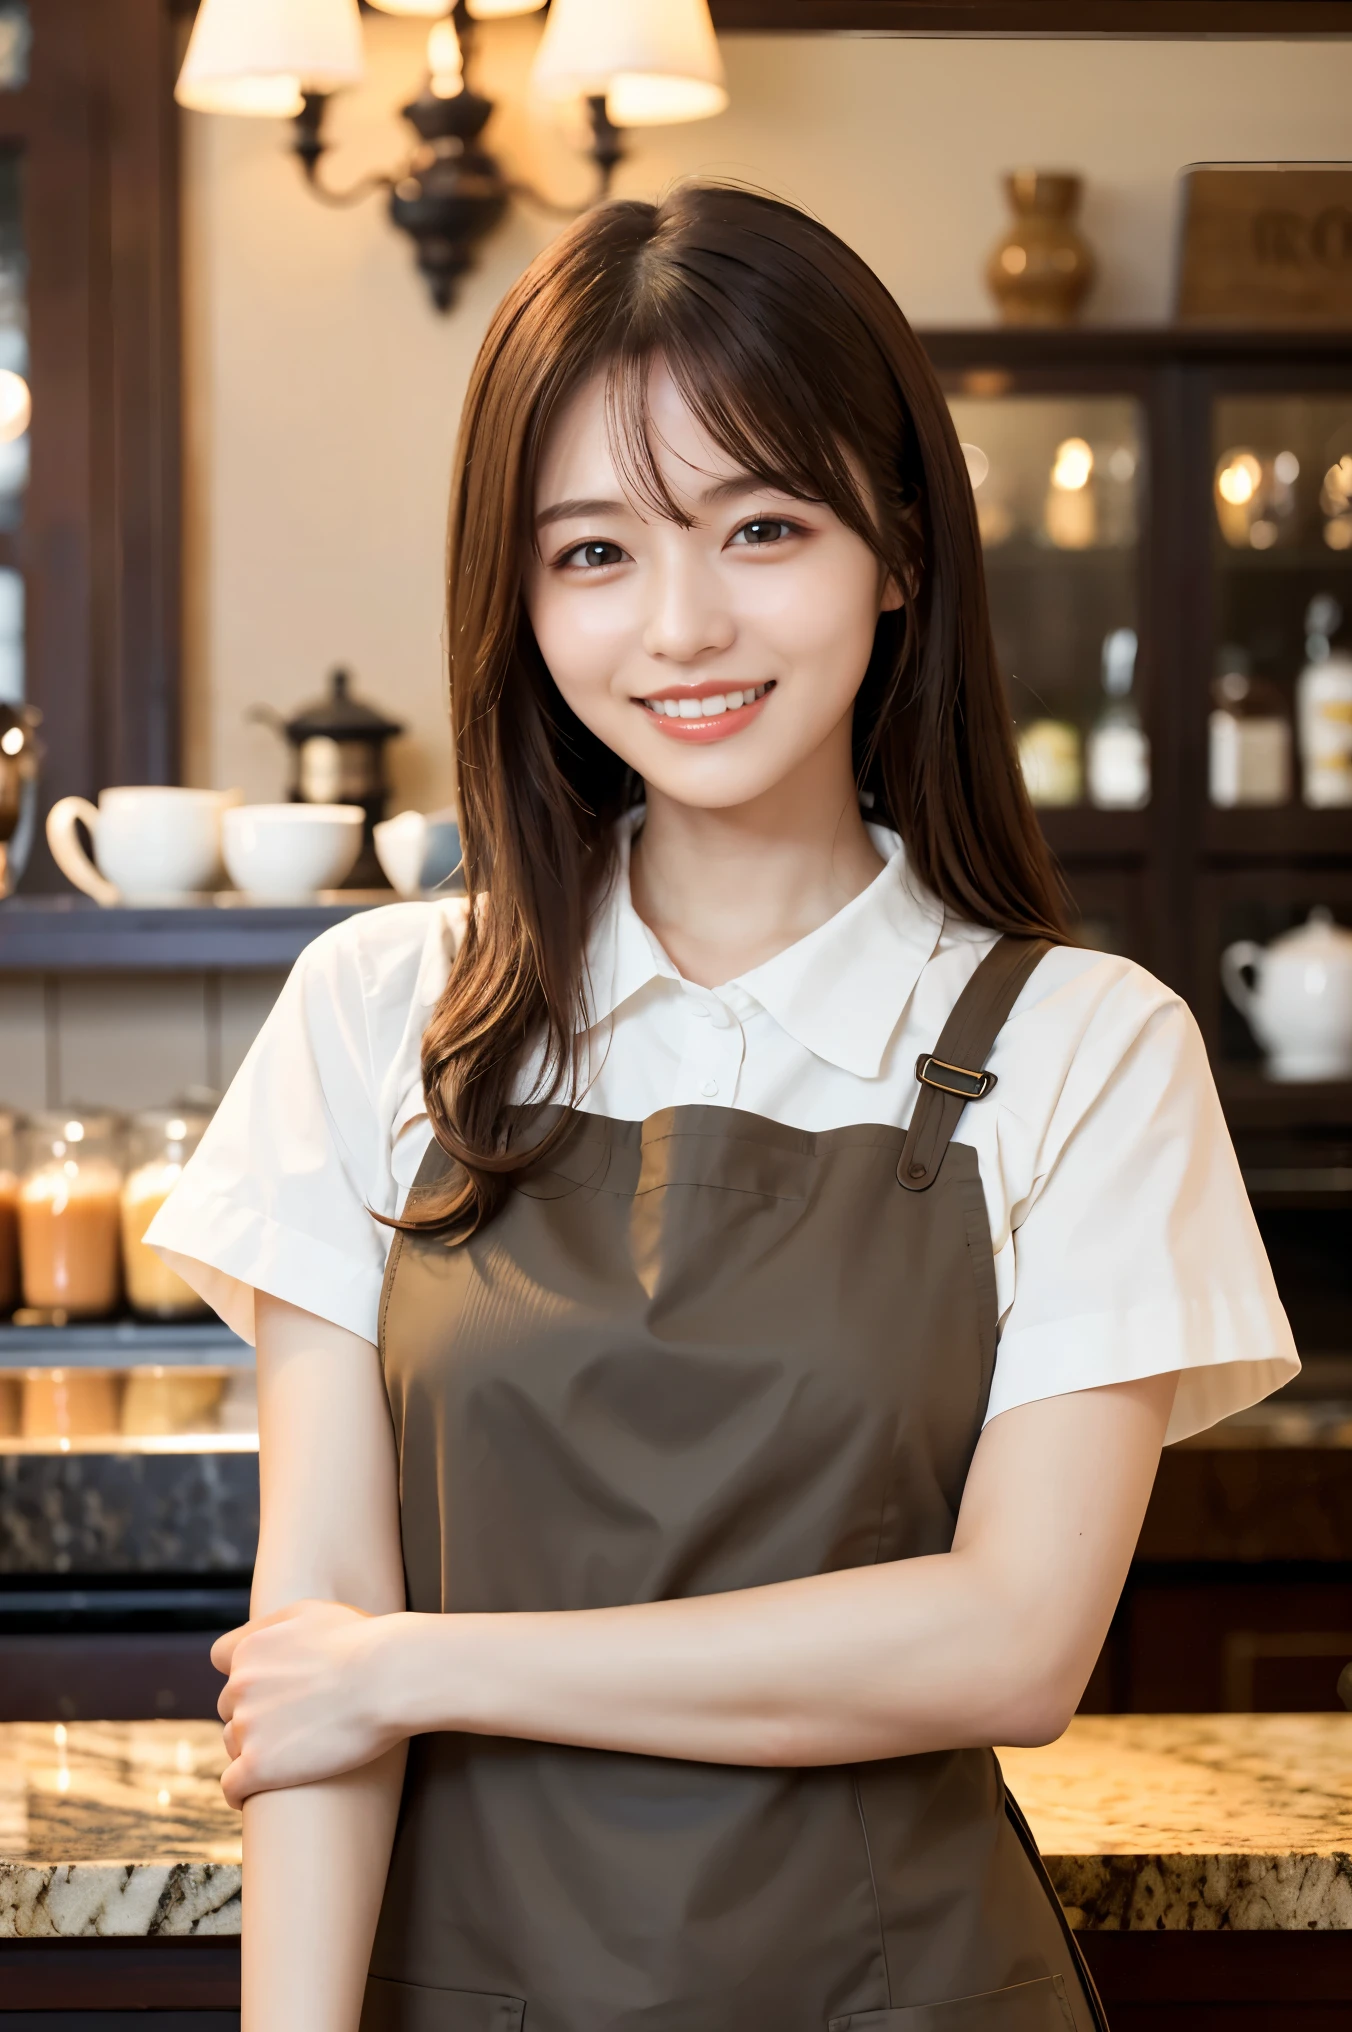 (highest quality、Tabletop、8k、Best image quality、Award-winning works)、Woman working in a café、(The perfect brown apron:1.1)、(The perfect brown apron:1.1)、(Wide々She stands elegantly in a drab cafe.:1.3)、(A classy shirt and apron:1.1)、(Big Breasts:1.1)、(Accentuate your body lines:1.1)、Beautiful woman portrait、The most elegant and cozy cafe、The most natural cafe, Perfectly organized、The most atmospheric and warm lighting、Stylish and elegant cafe、Strongly blurred background、Look at me and smile、(Accurate anatomy:1.2)、Ultra high resolution perfect beautiful teeth、Ultra-high definition beauty face、Ultra HD Hair、Ultra HD The Shining Eyes、The Shining, Super high quality beautiful skin、Super high quality glossy lip